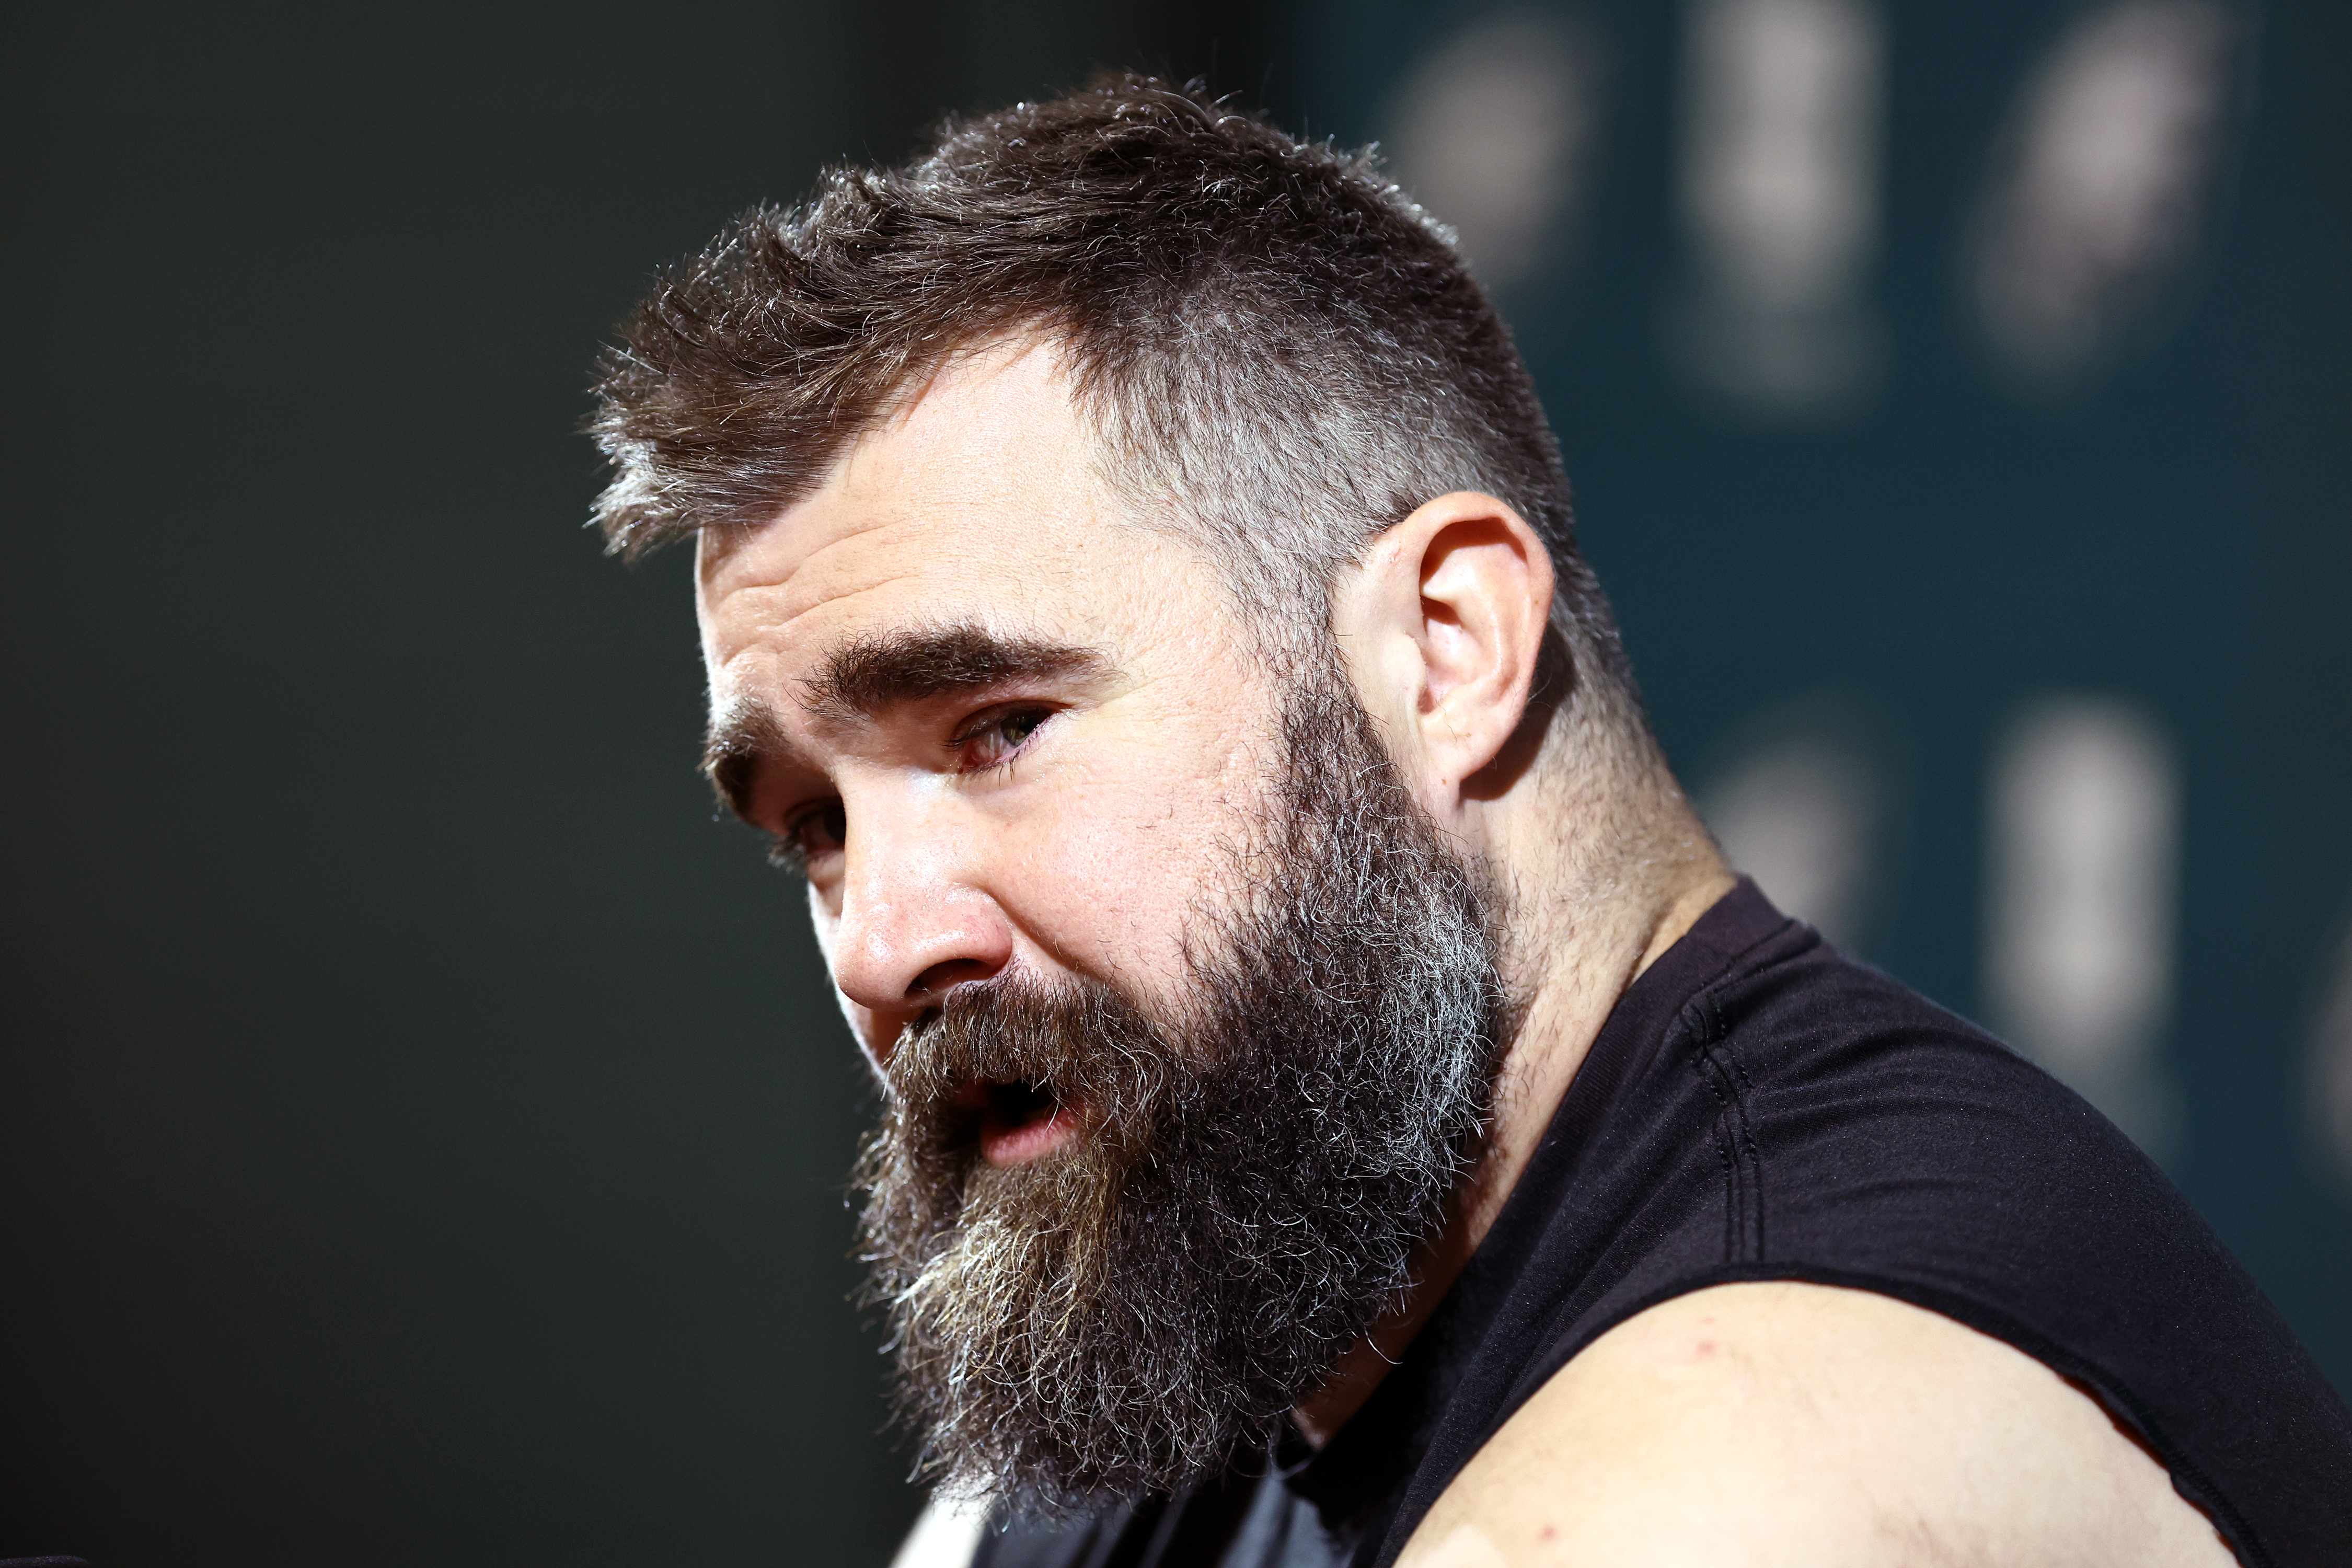 Jason Kelce reveals the one person he ‘wouldn't allow' on stage if
he was roasted